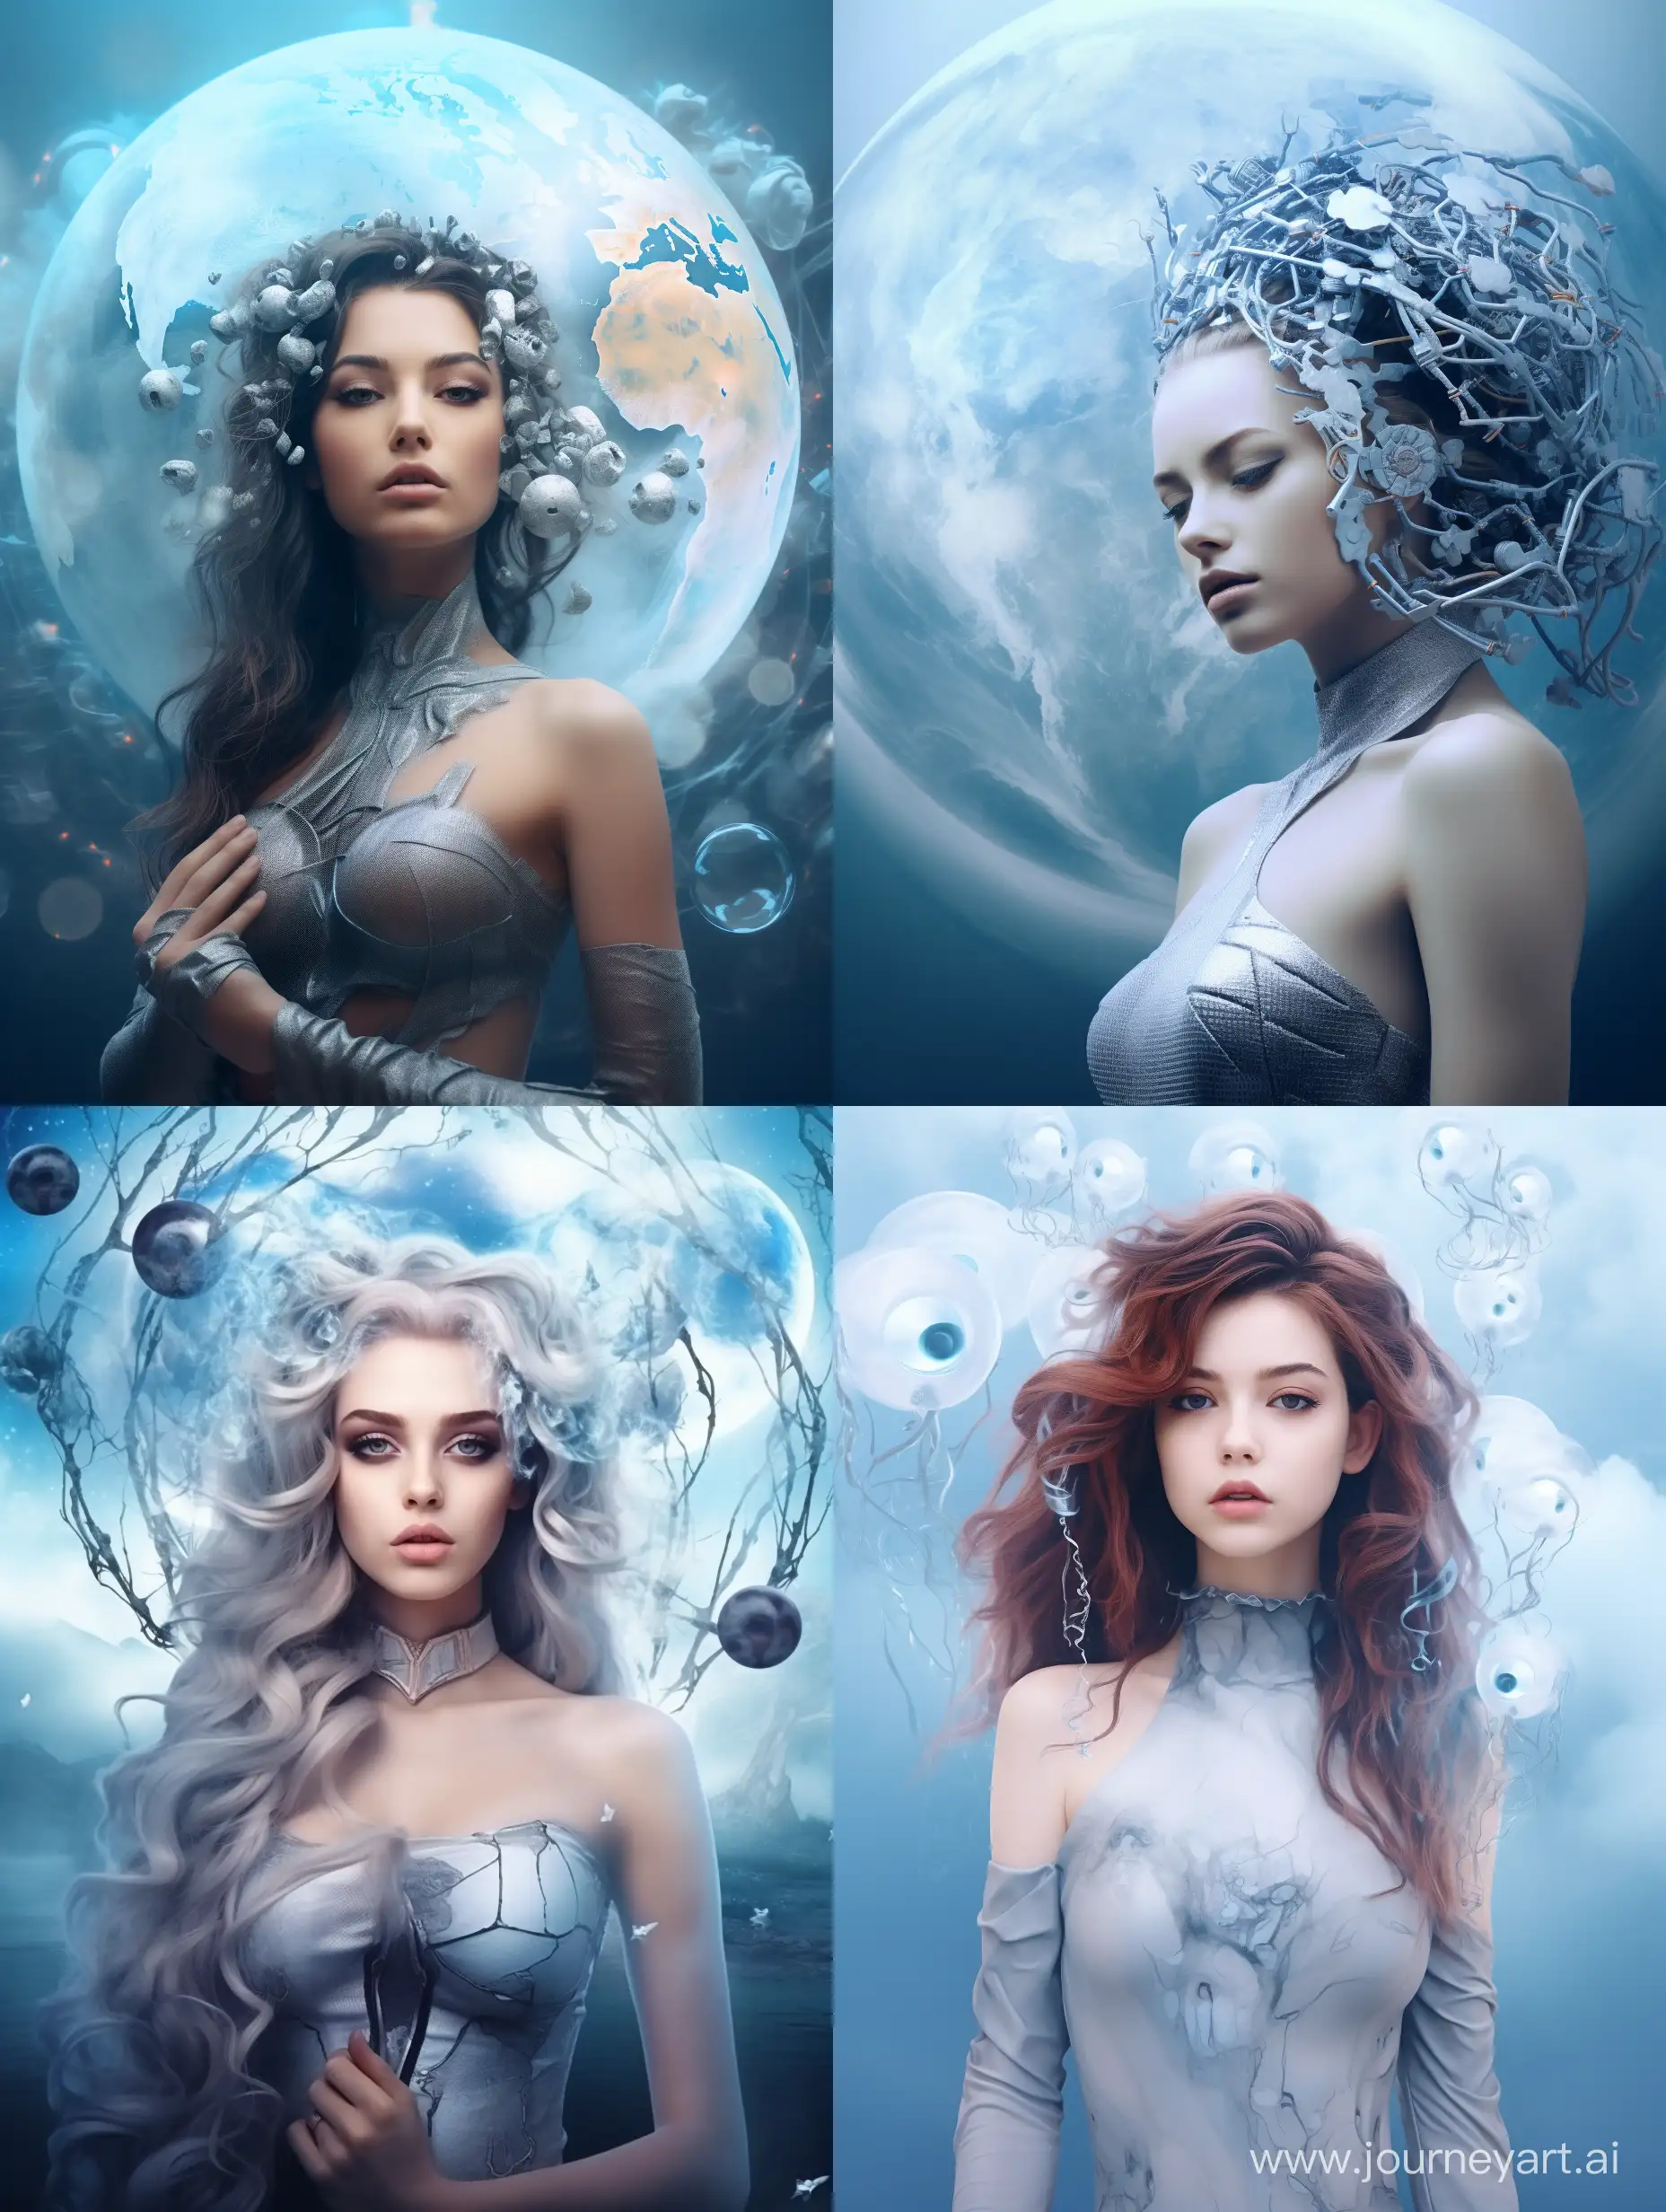 Neural network in the form of a beautiful girl with robot elements, close-up, neurons are generated around the head, fog, haze of bluish color, on the background the globe shrouded in clouds